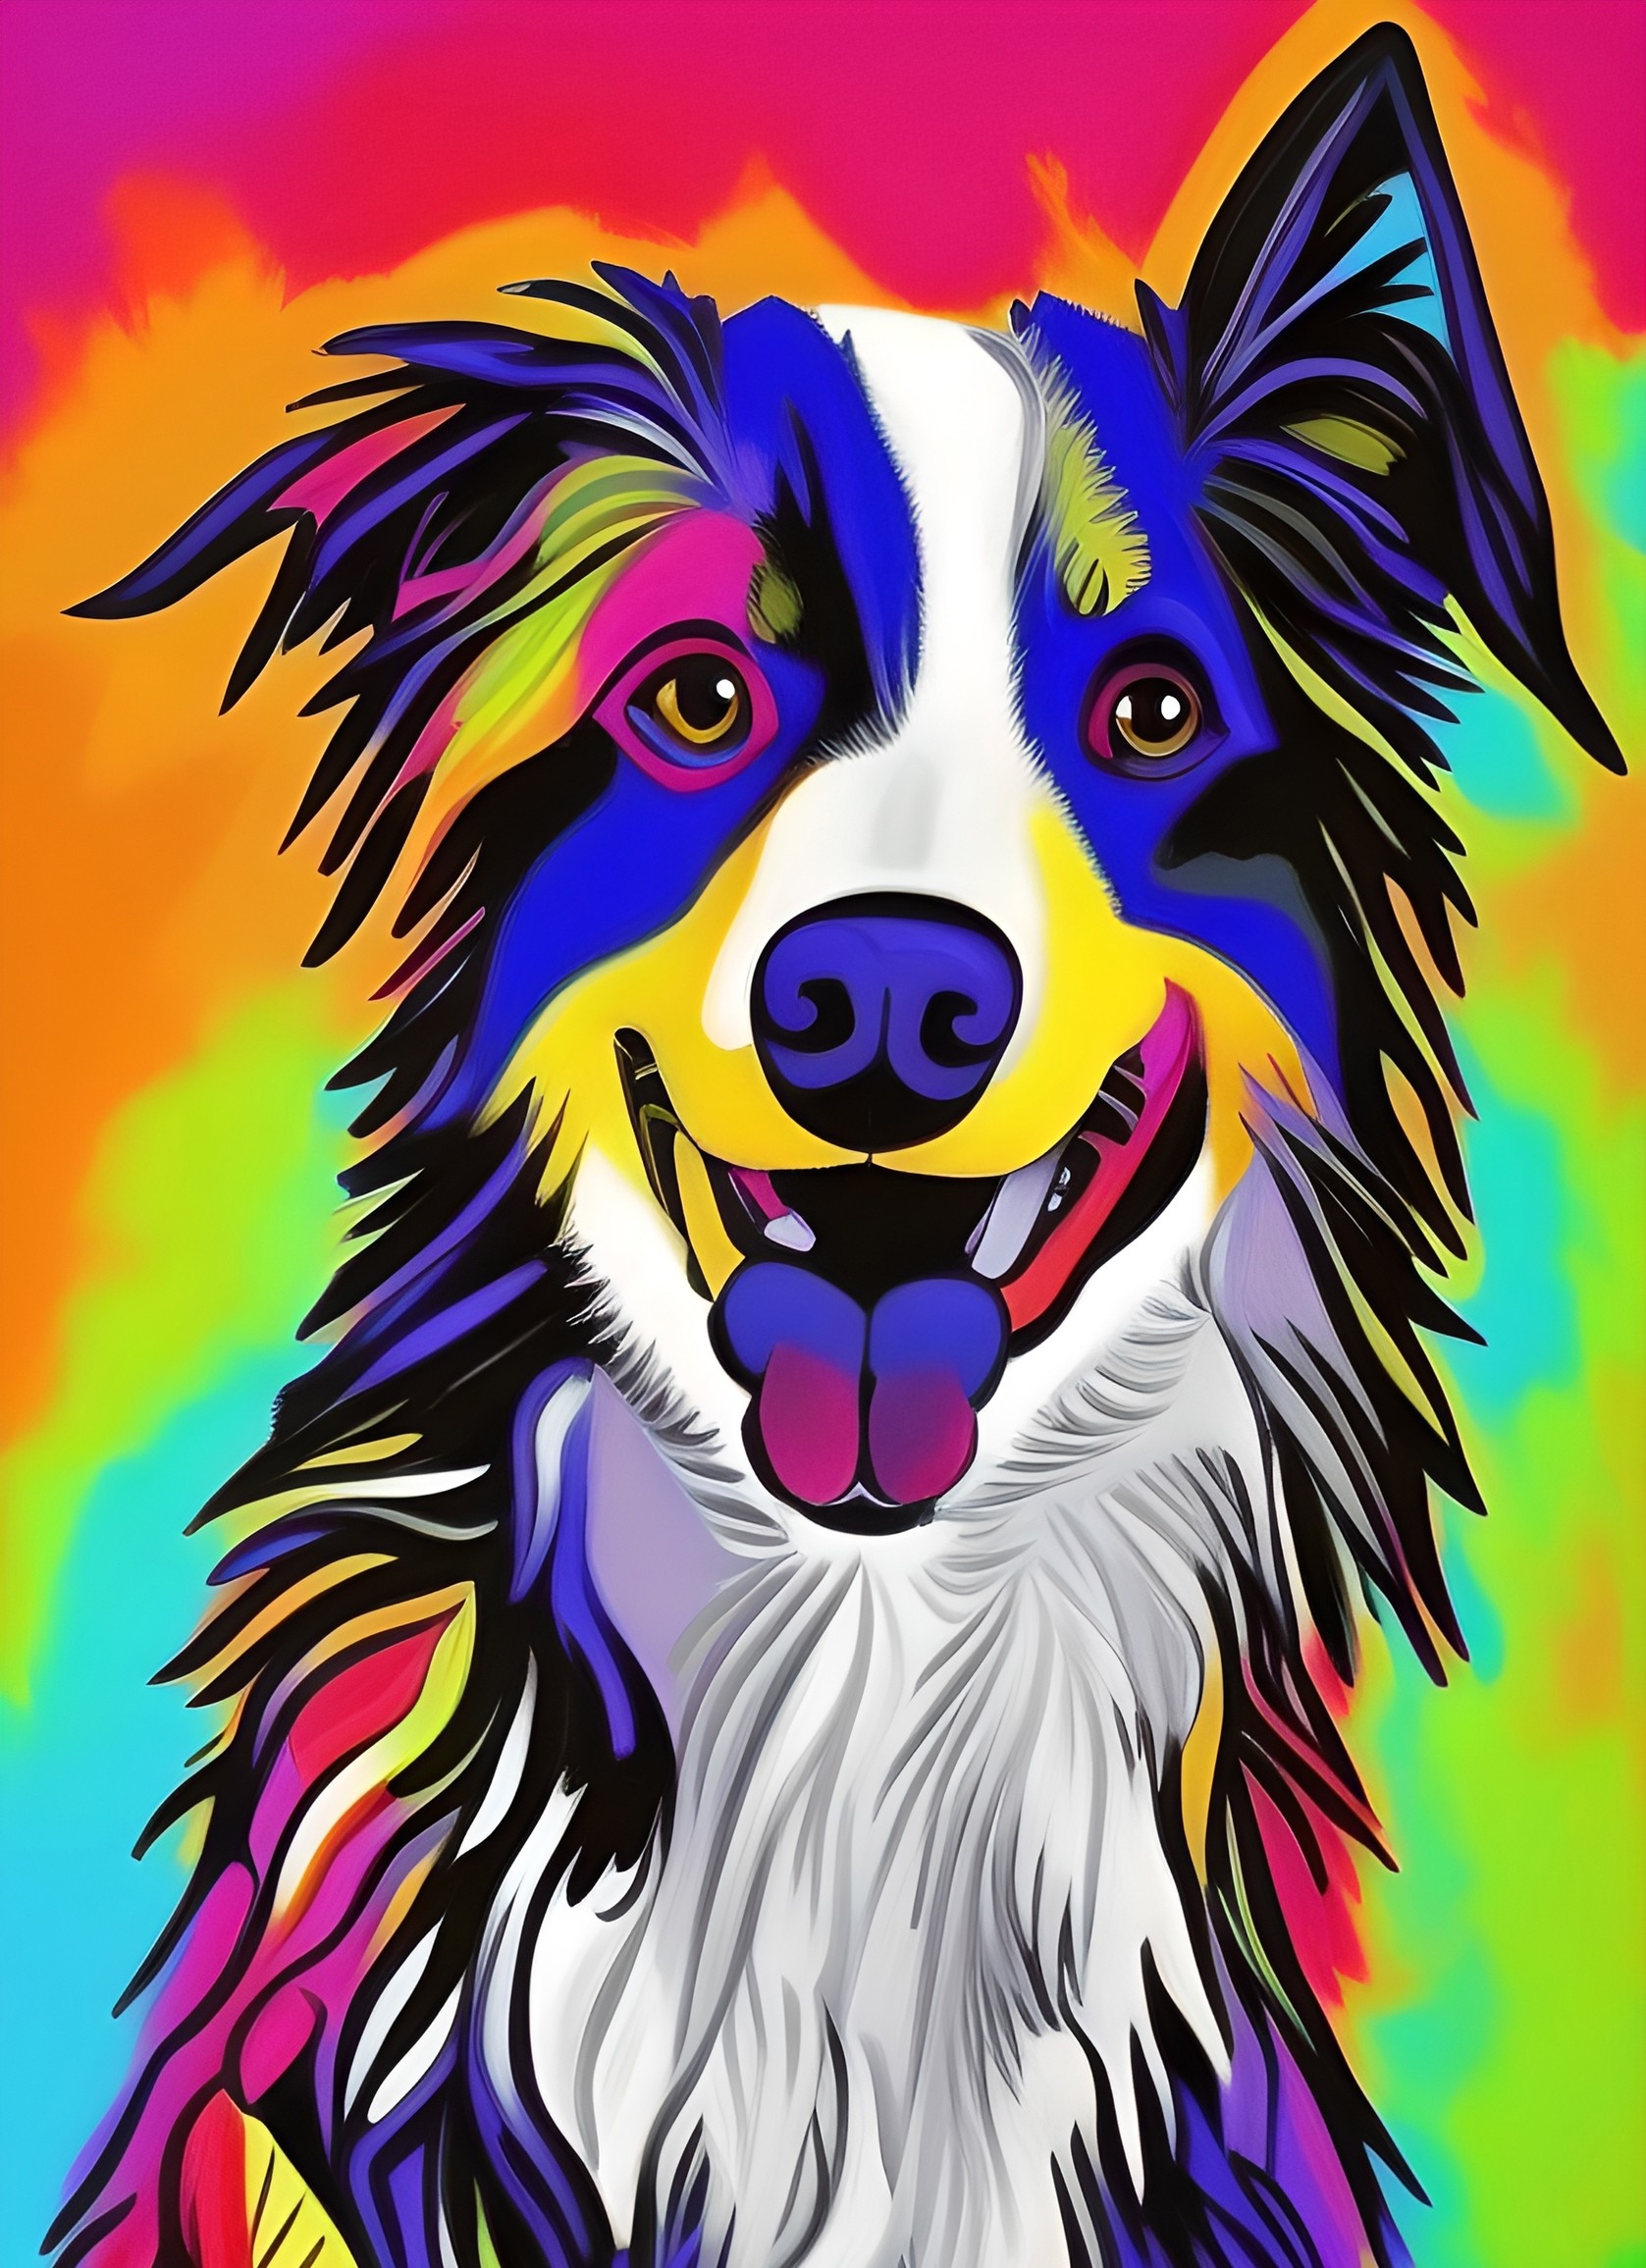 Border Collie Dog Colourful Abstract Art Blank Greeting Card